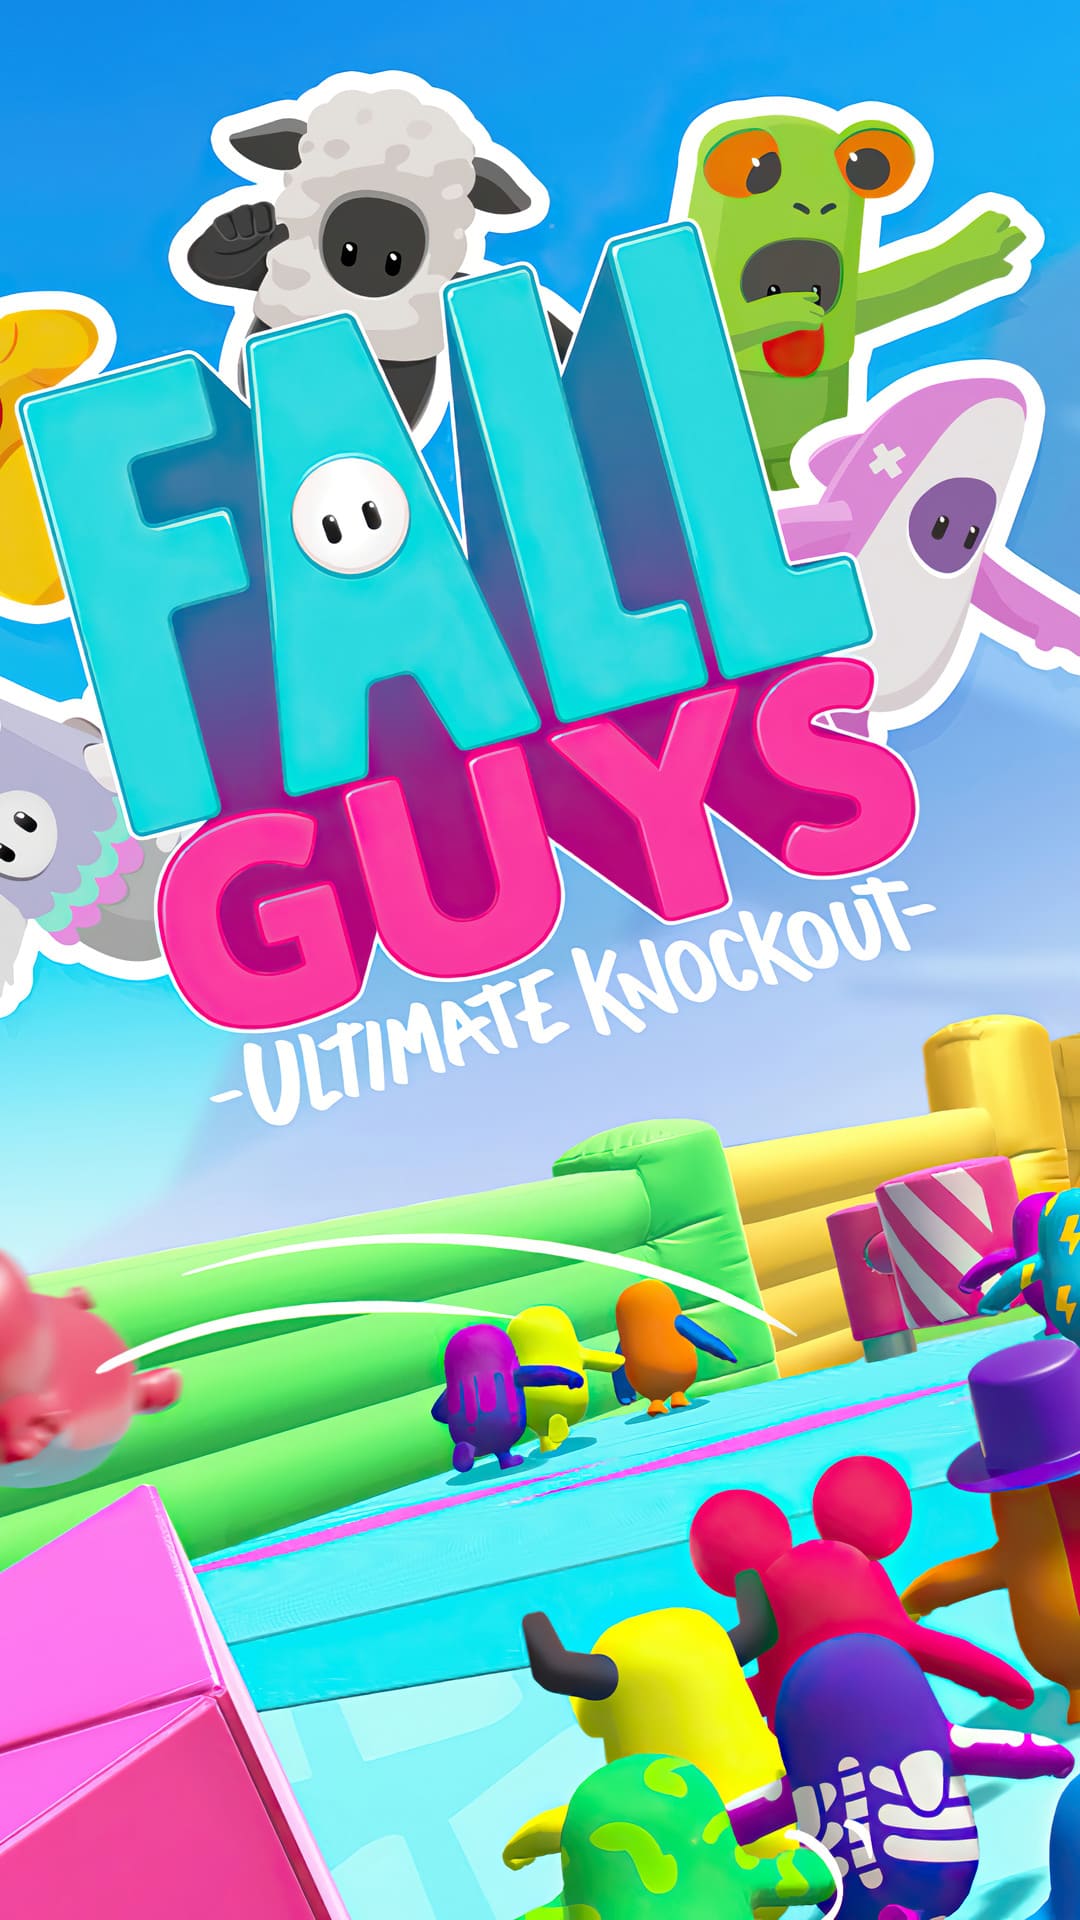 Fall Guys Wallpapers